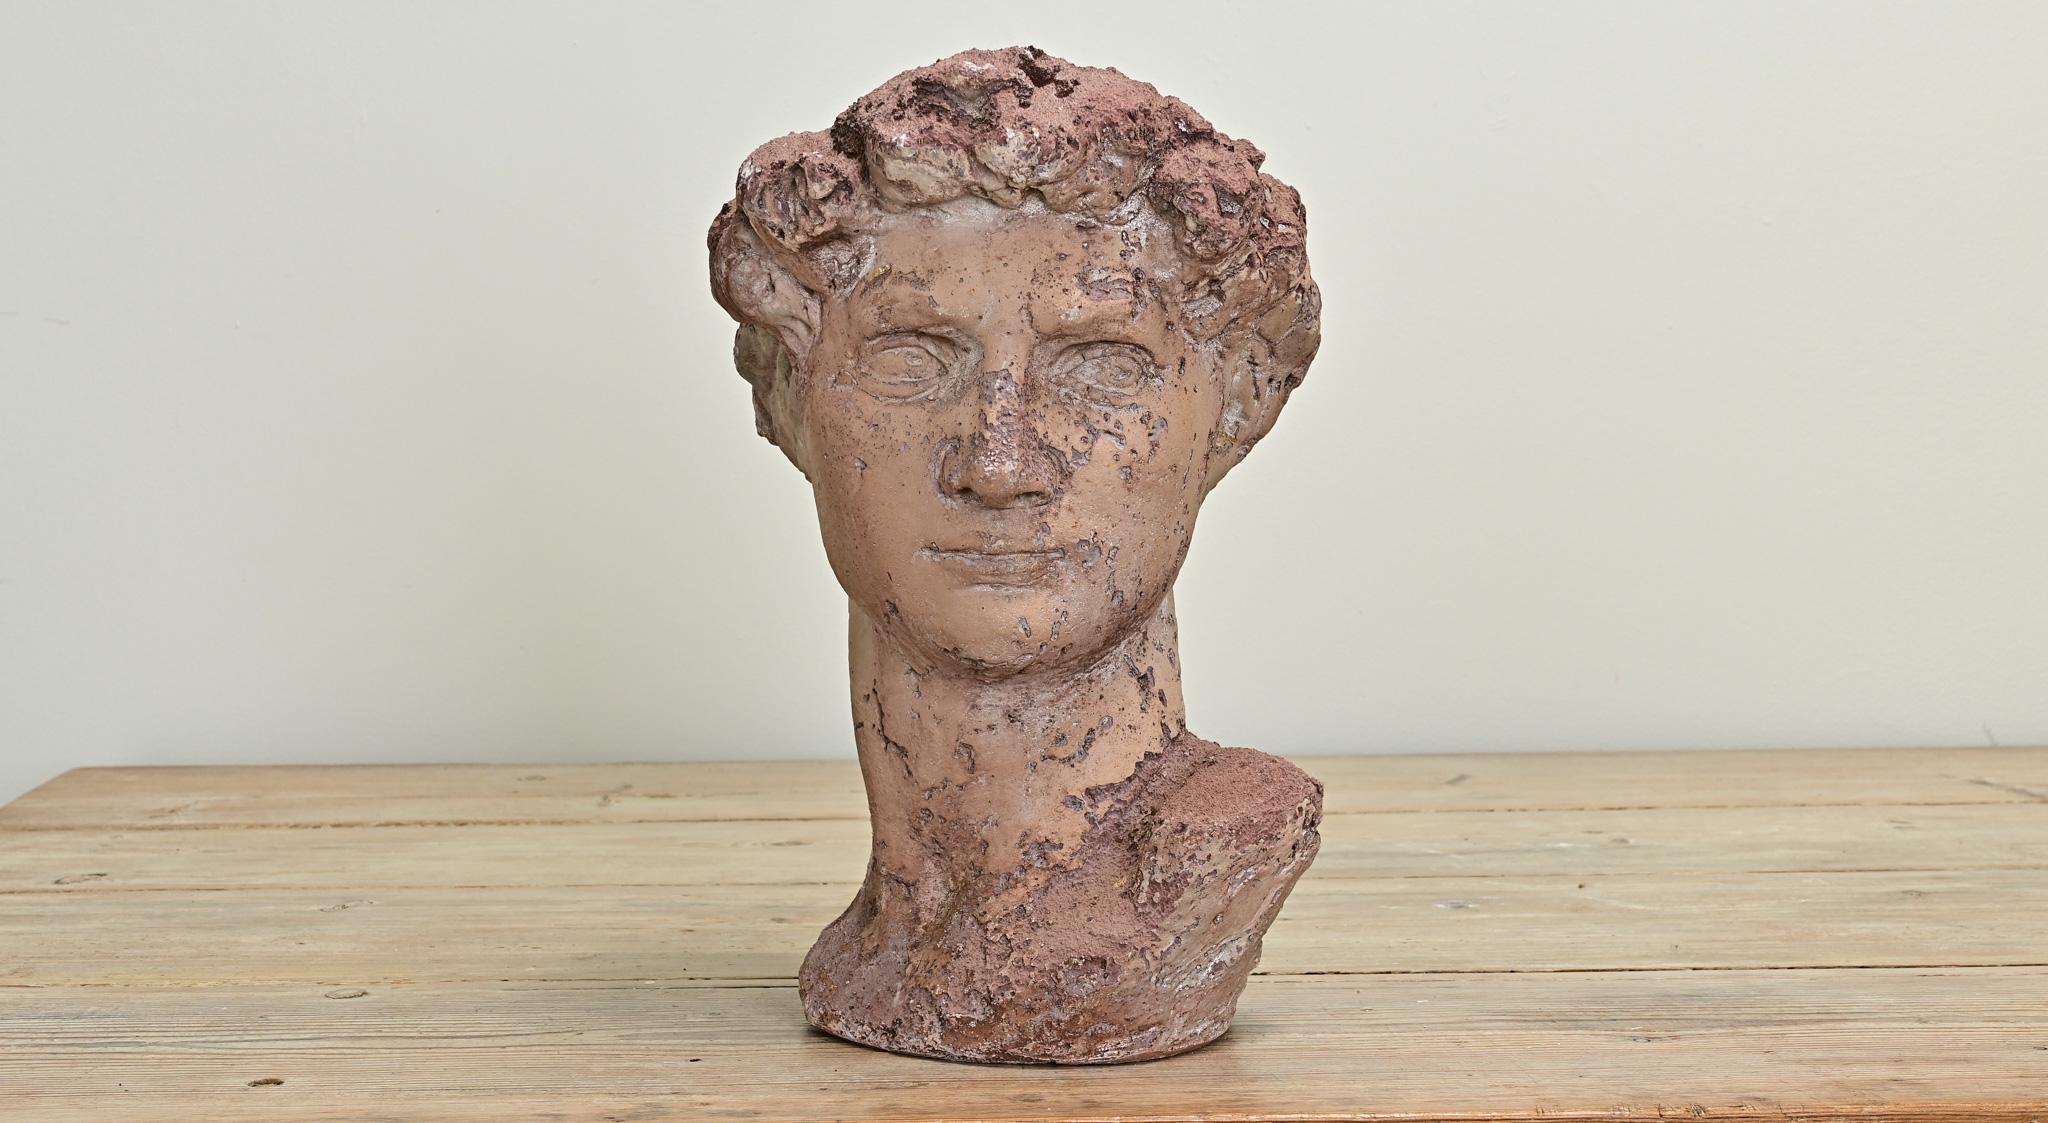 A European bust of a man made of stained reconstituted stone. Impressive craftsmanship and details are found throughout. Be sure to view the detailed images to see every angle. 